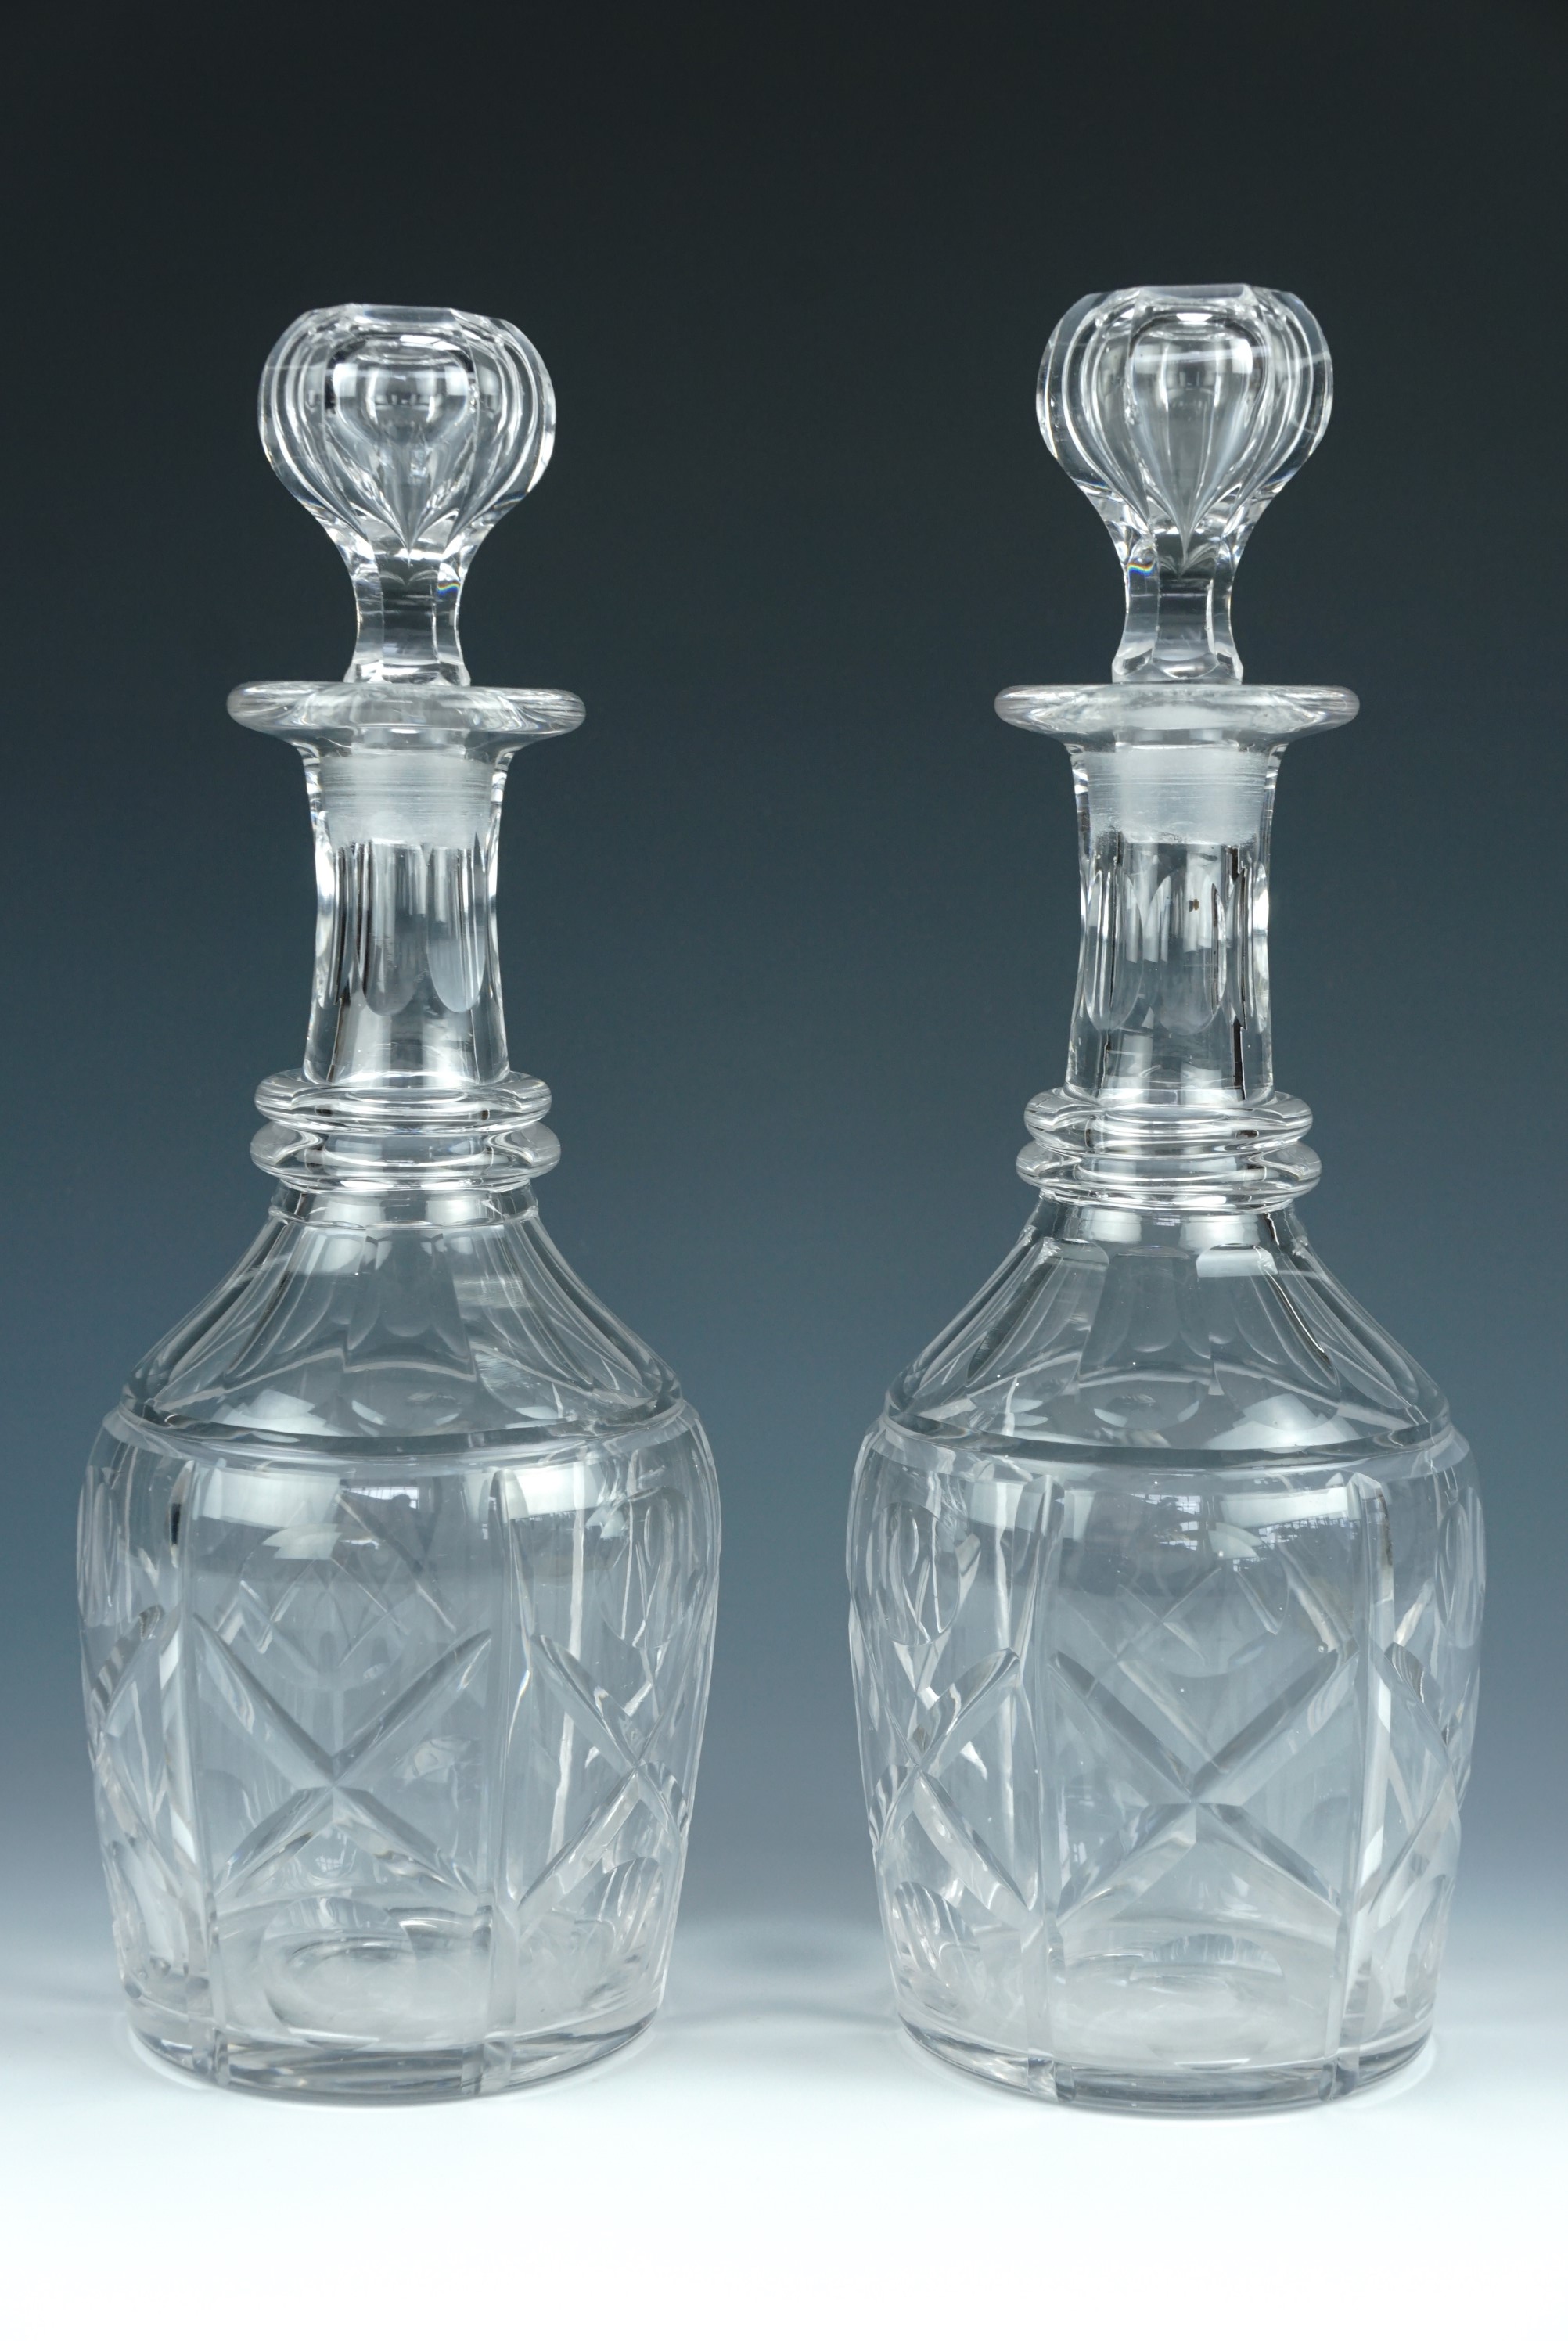 A pair of Victorian cut glass decanters, 30 cm